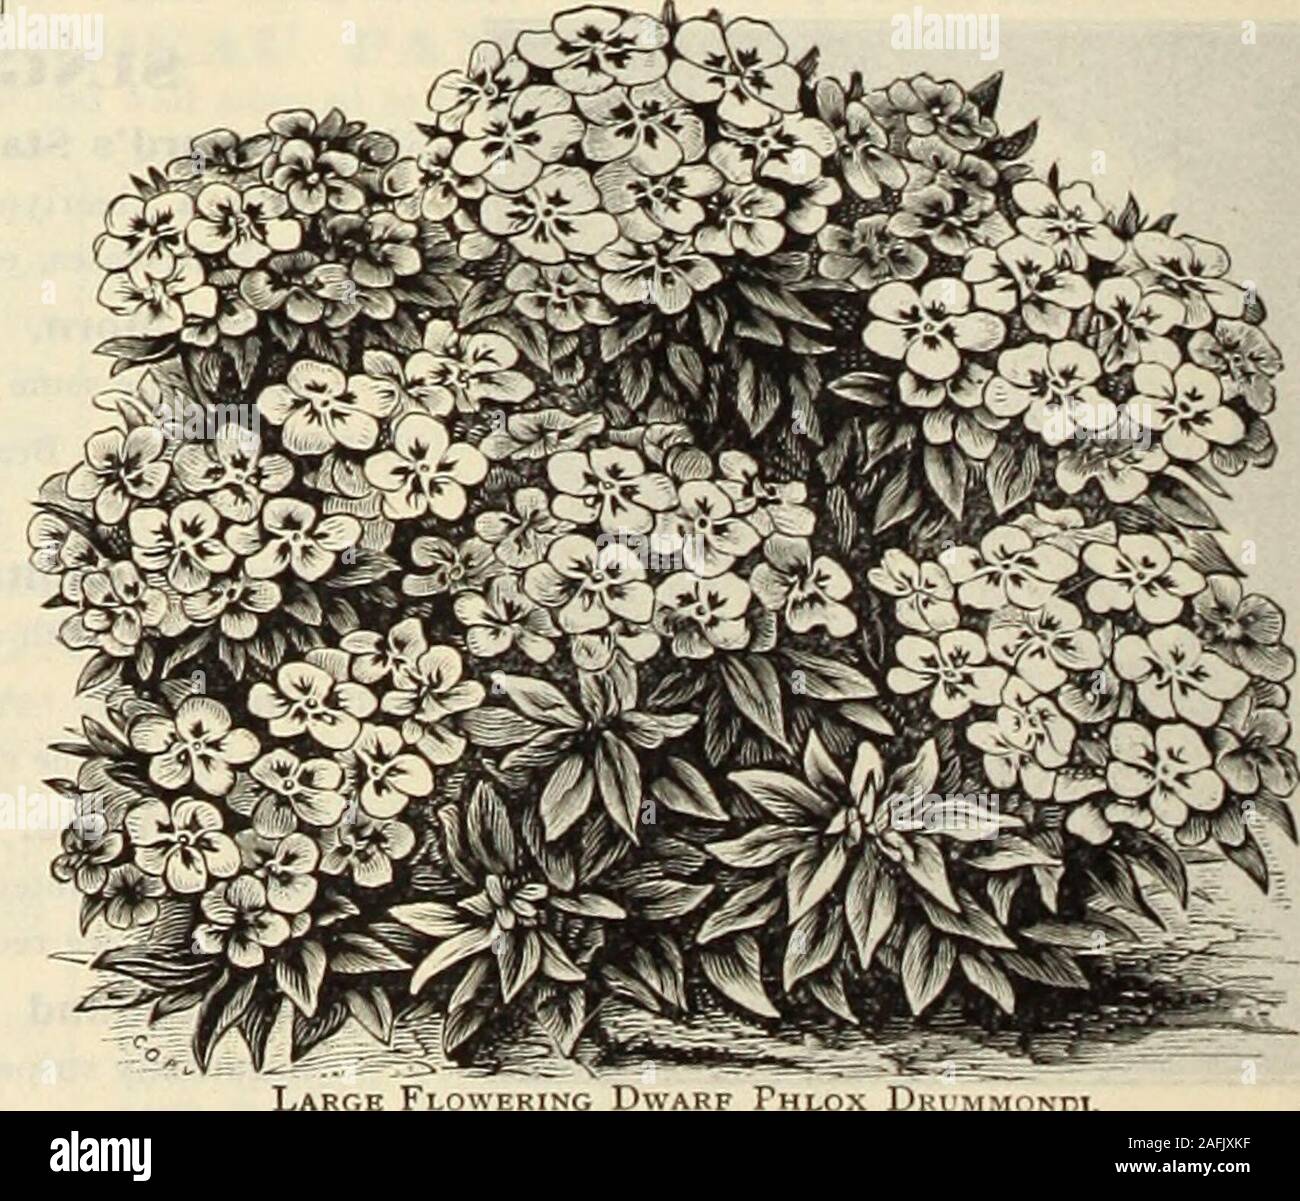 . Dreer's garden book 1915. oz., 25 cts.; oz., 75 cts 10 DOUBLE PHLOX. 3638 Especially desirable for cut flowers, lasting better thanthe single sorts. To produce the best results theyshould be grown in a light soil. Finest mixed colors.i oz., 50 cts 10. Large Flowering Dwarf Phlox D Books on horticultural lubjects are offered on the inside of back of cover. fMHWADREER -PHILAPmiAM^ RELIABLE FLOWER SEEDS M ^ PEXTSTEMON ^Beard Tongue). Highly useful and attractive perennials, and much used in the hardy border. PER PKT. 3o32 Qloxinioides Sensation. As a bedding plant this takes rank with thePetun Stock Photo